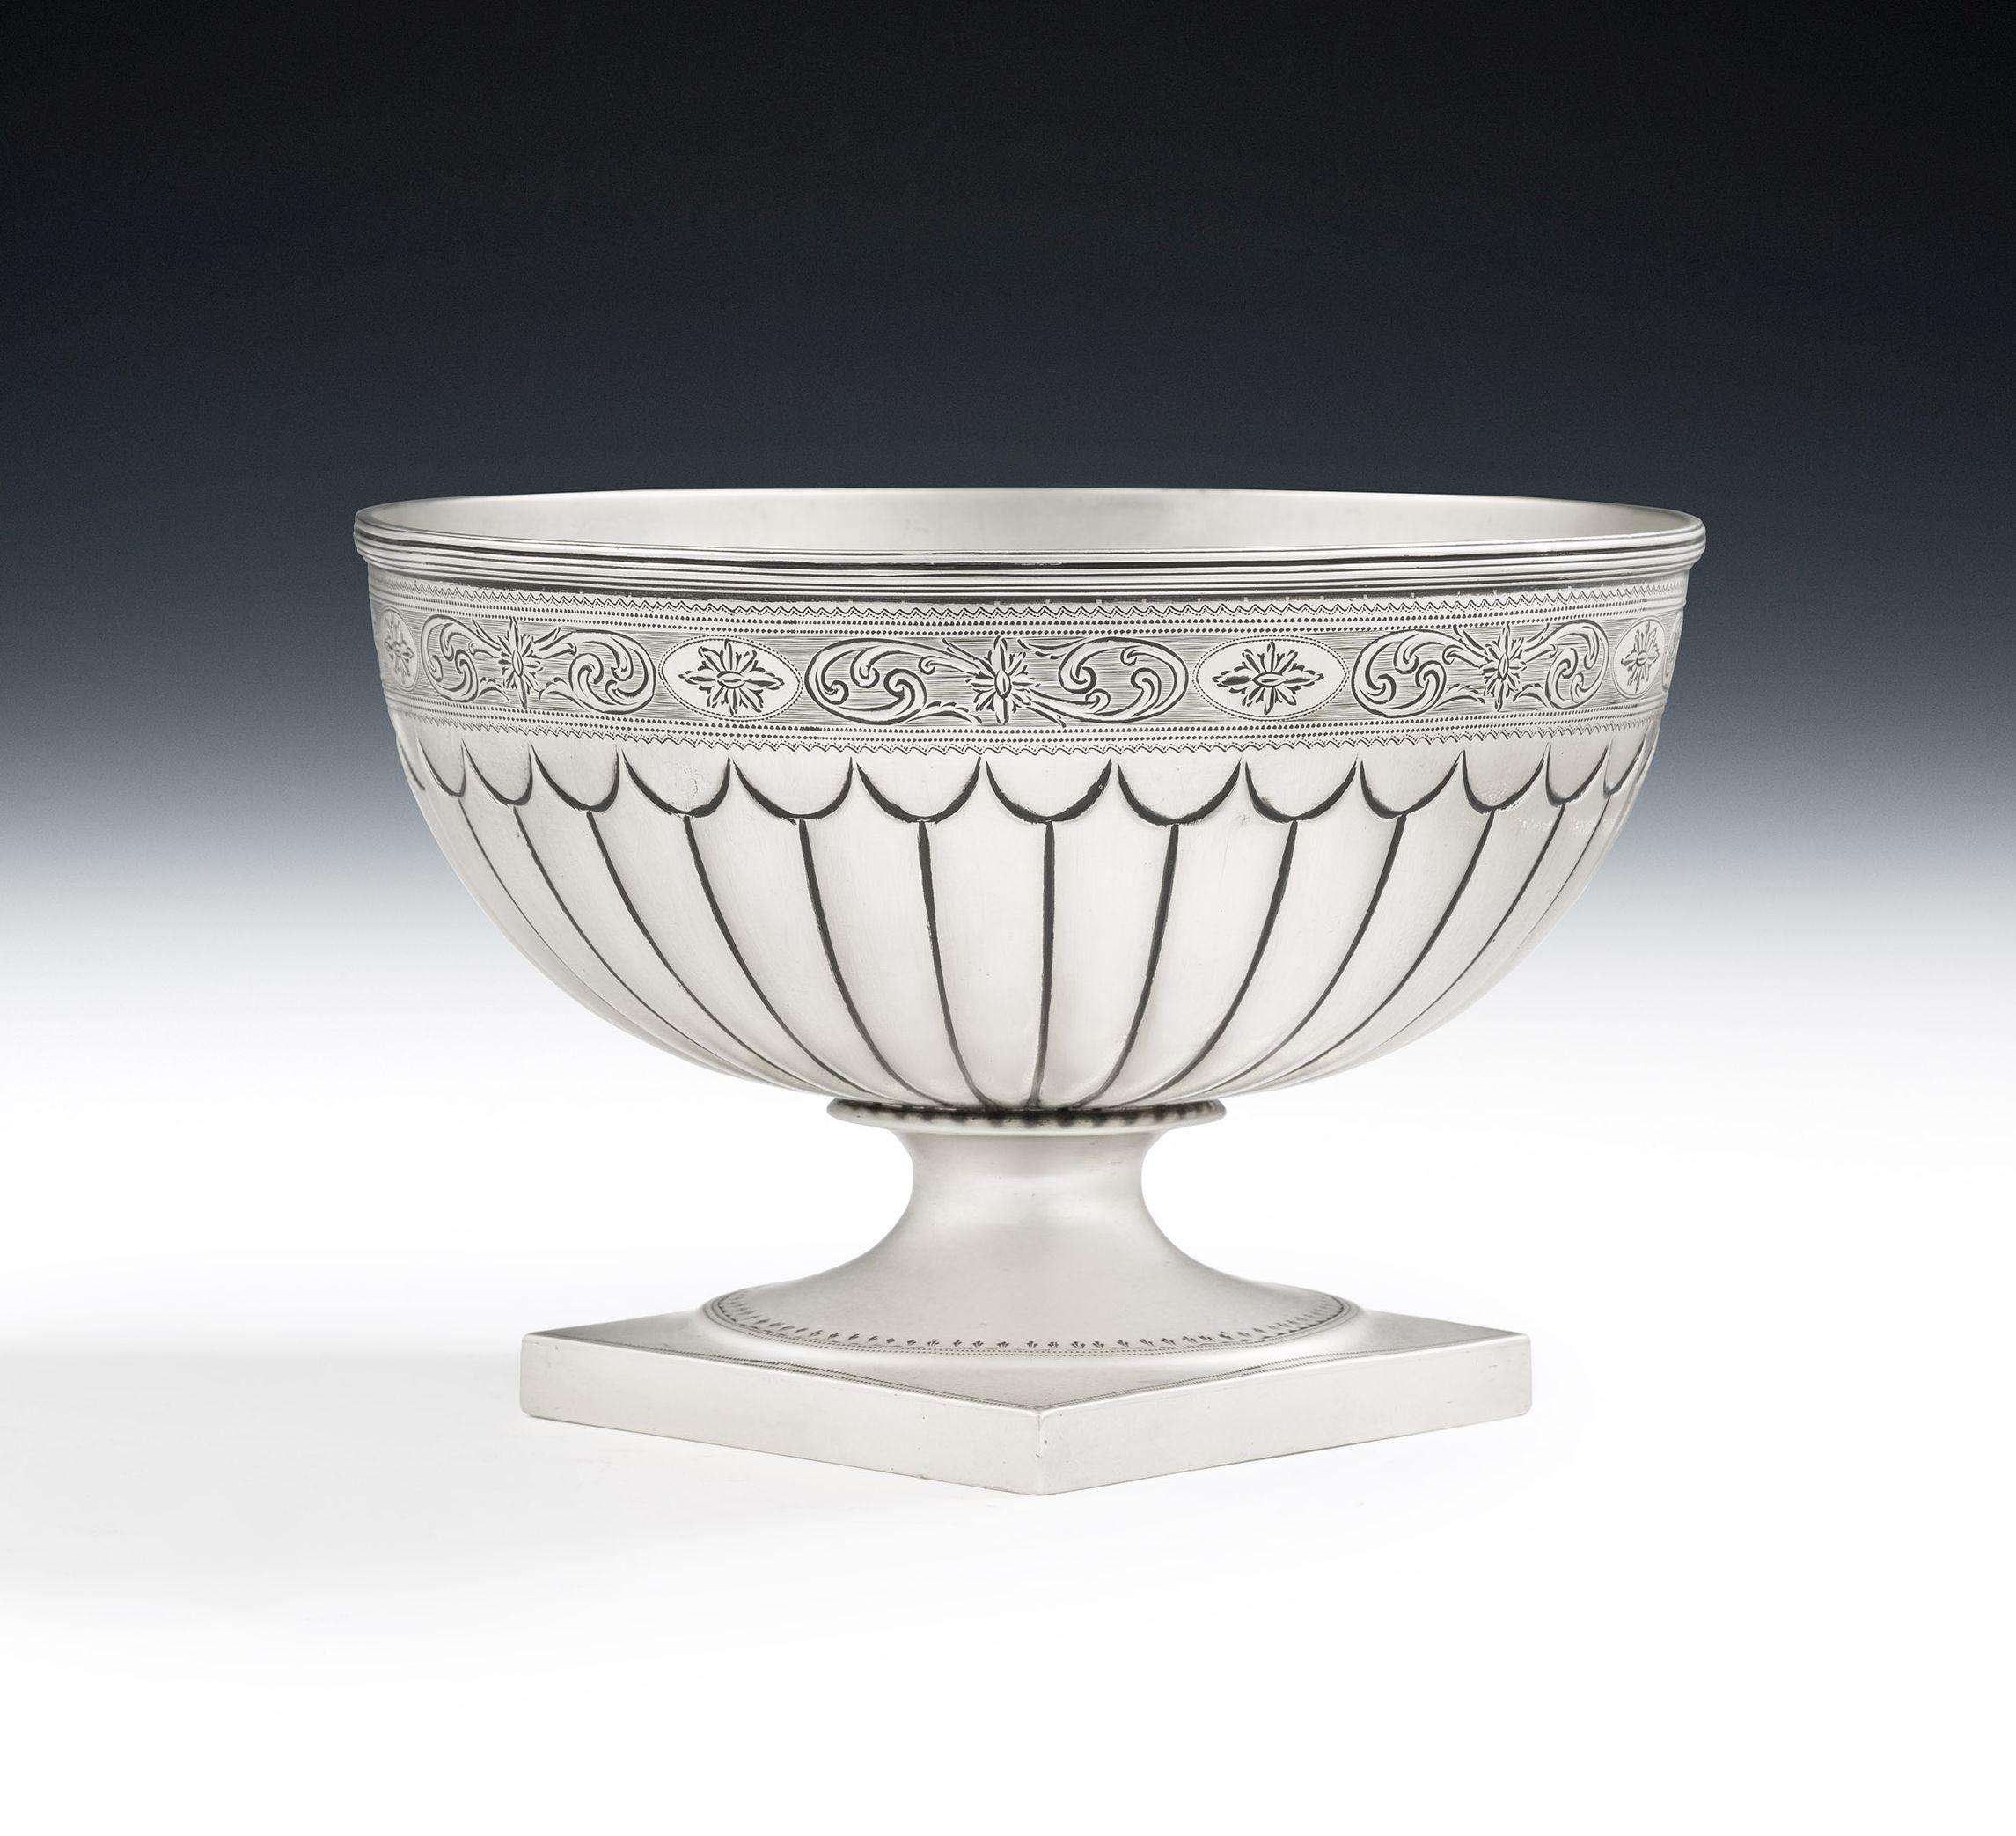 An exceptional George III Bat Wing Fluted Table Bowl made in London in 1790 by Peter Podio.

This beautiful piece stands on a square pedestal foot decorated with a bright cut band.  The main body displays a lower, wide, band of bat wing fluting and